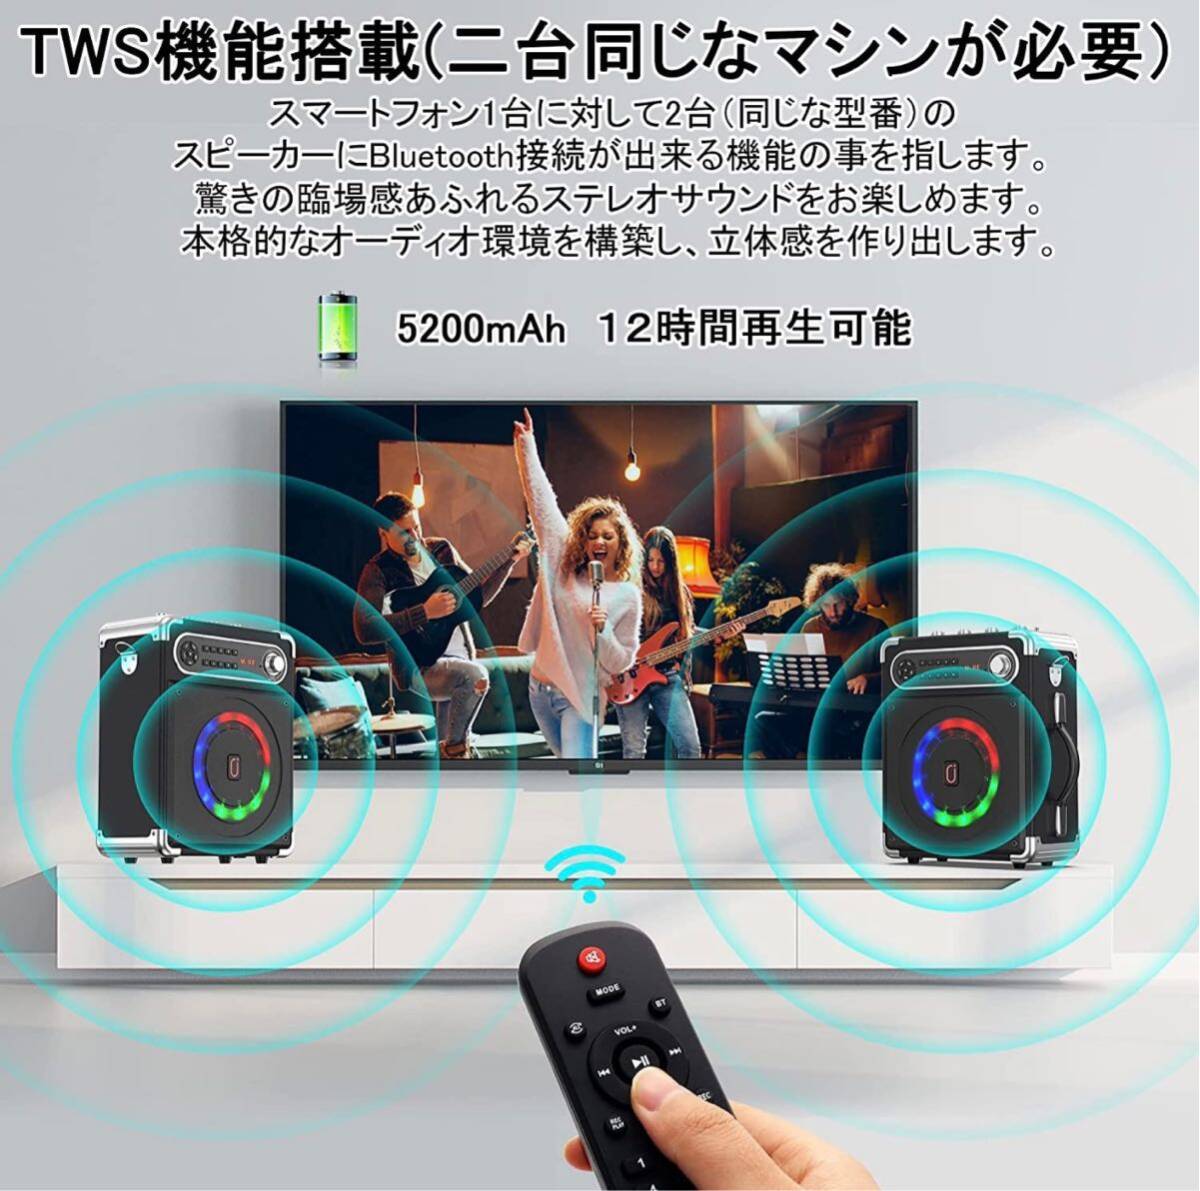  goods with initial defect junk speaker set wireless microphone 2 ps Bluetooth 5.0 correspondence japanese manual loudspeaker 